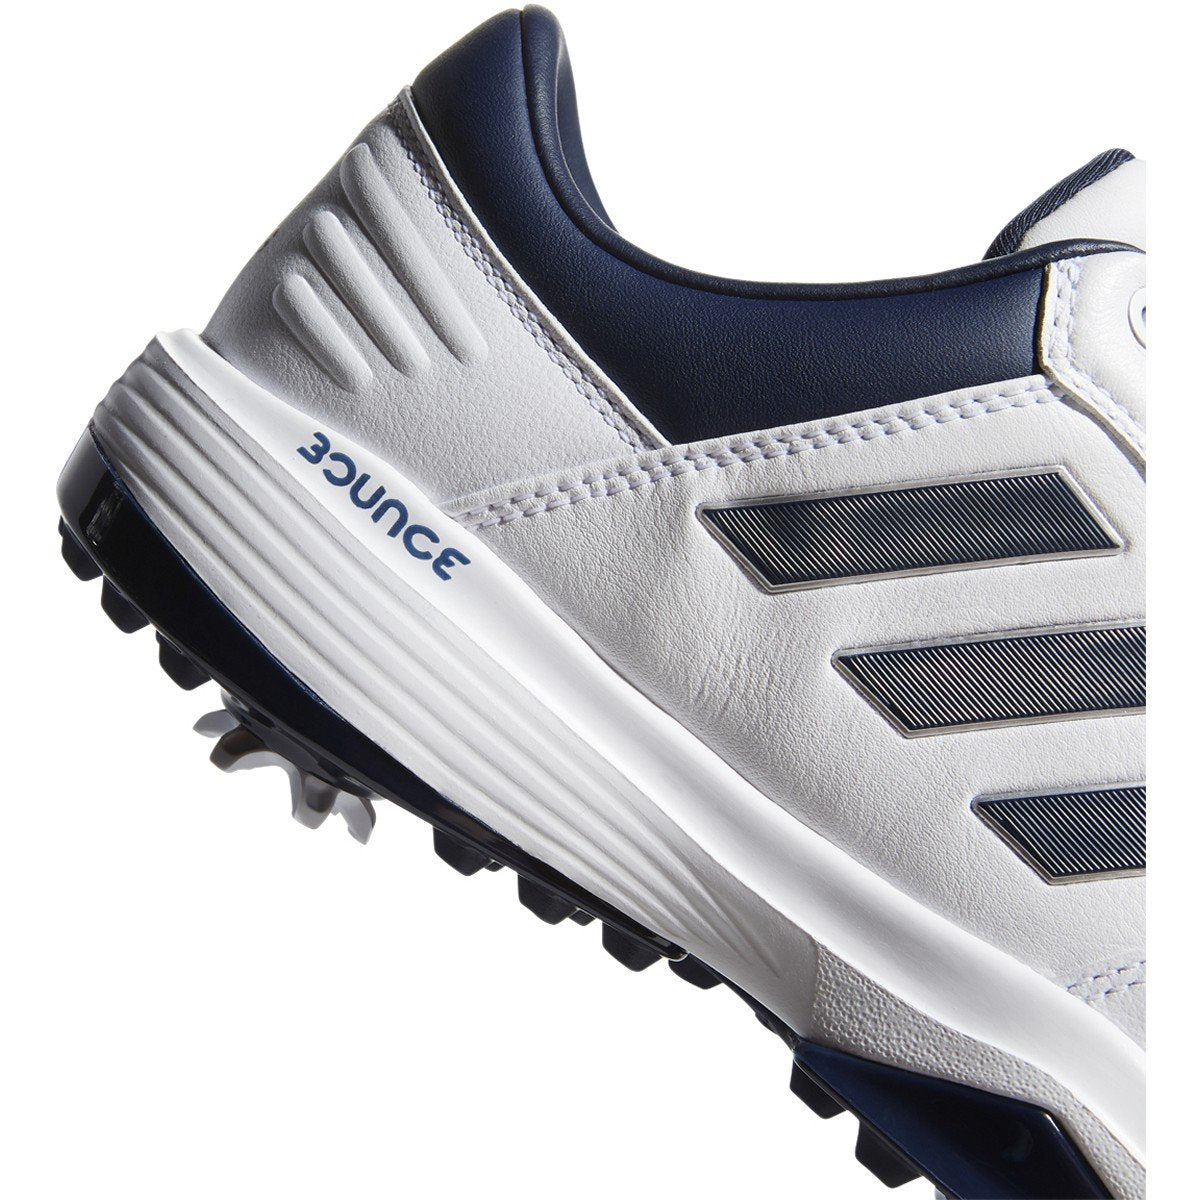 adidas 360 bounce golf shoes review